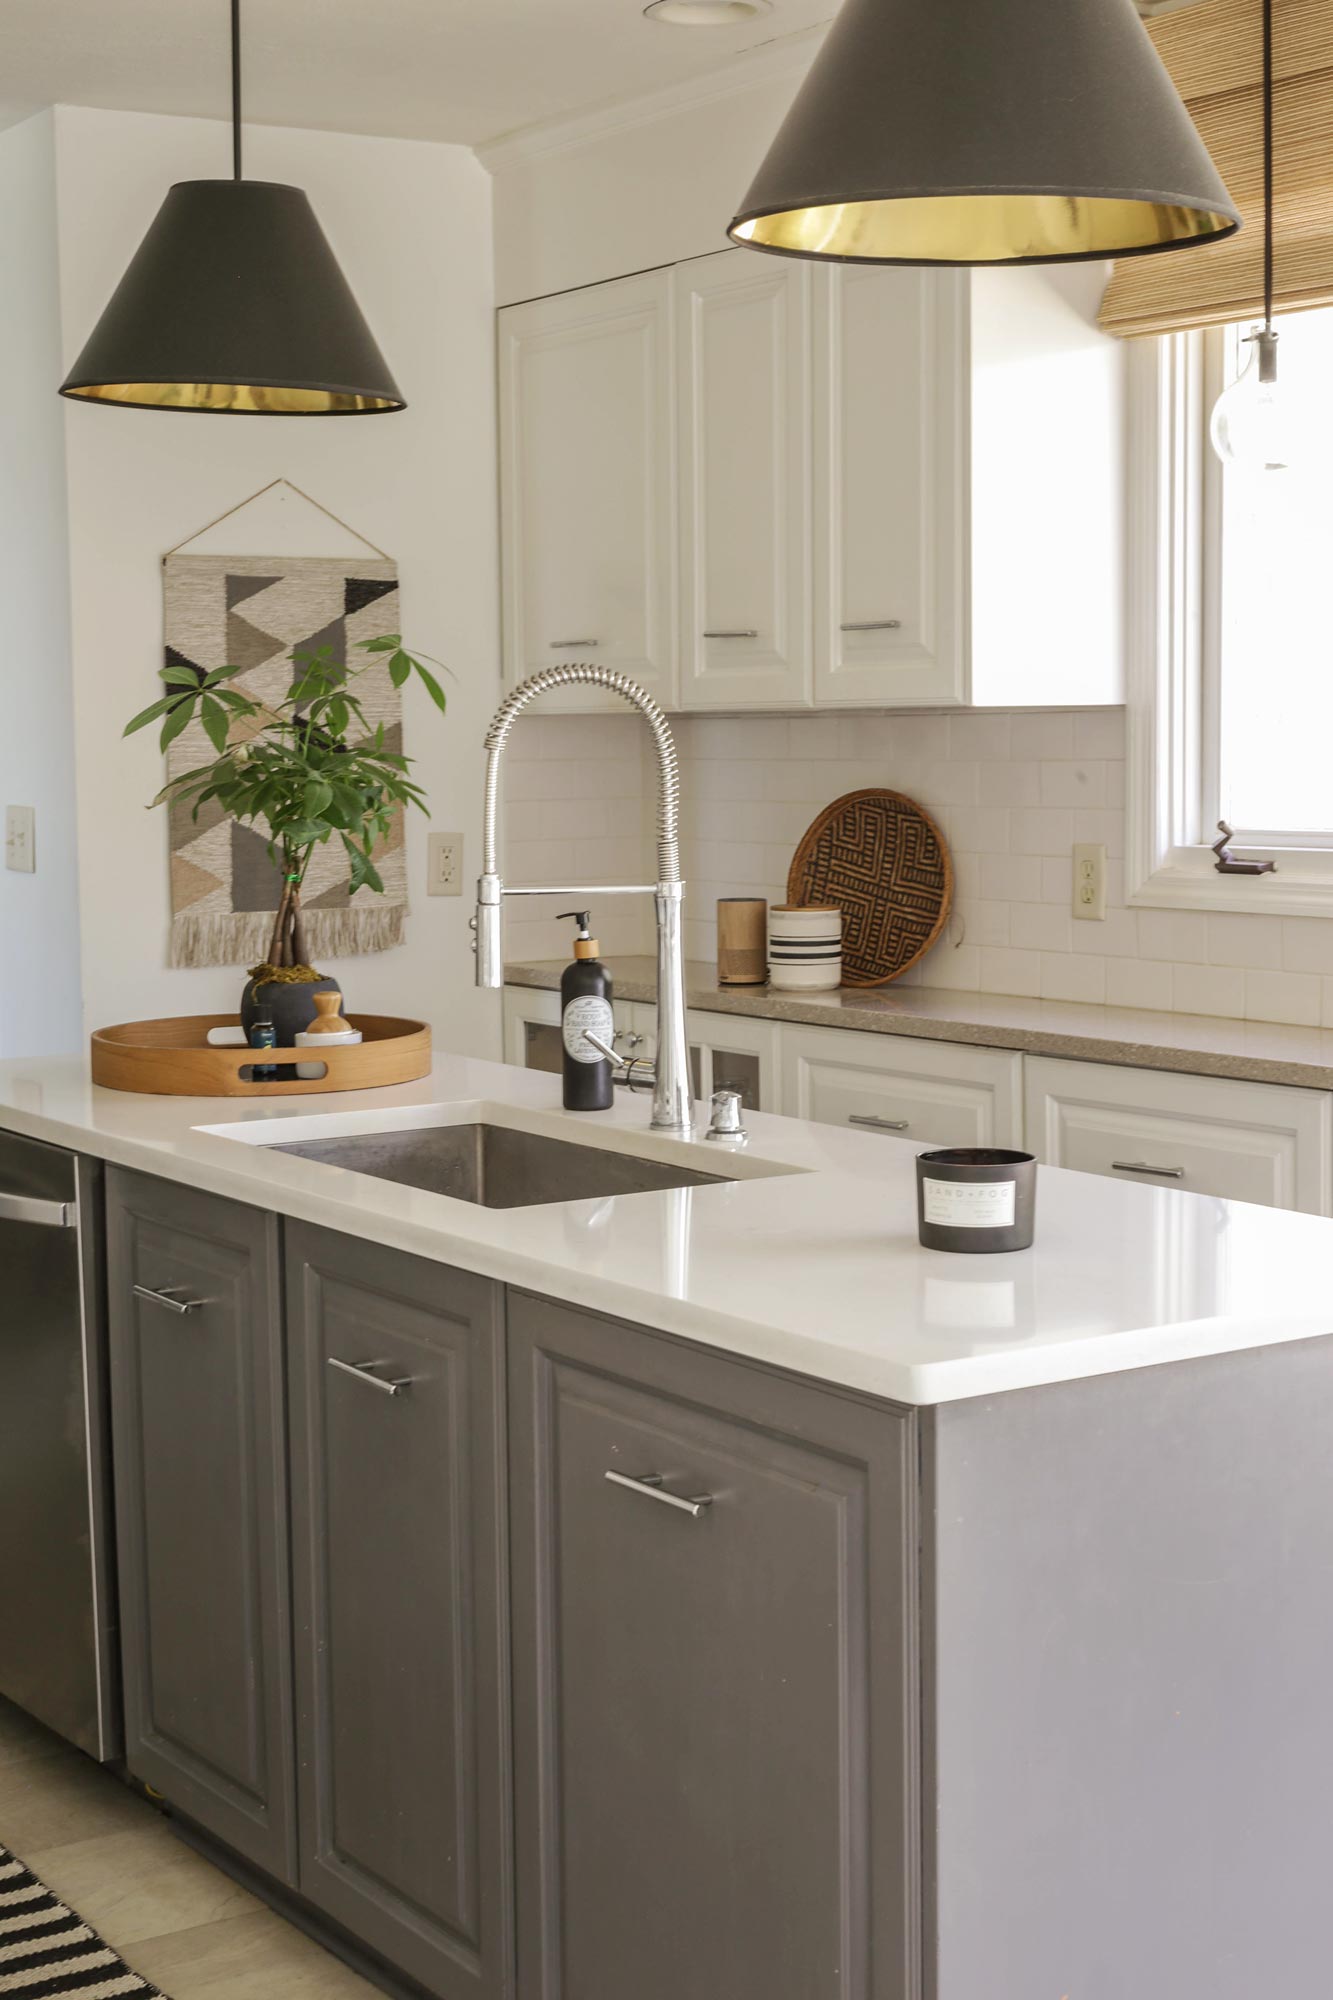 5 Cabinet Colors for Your Kitchen